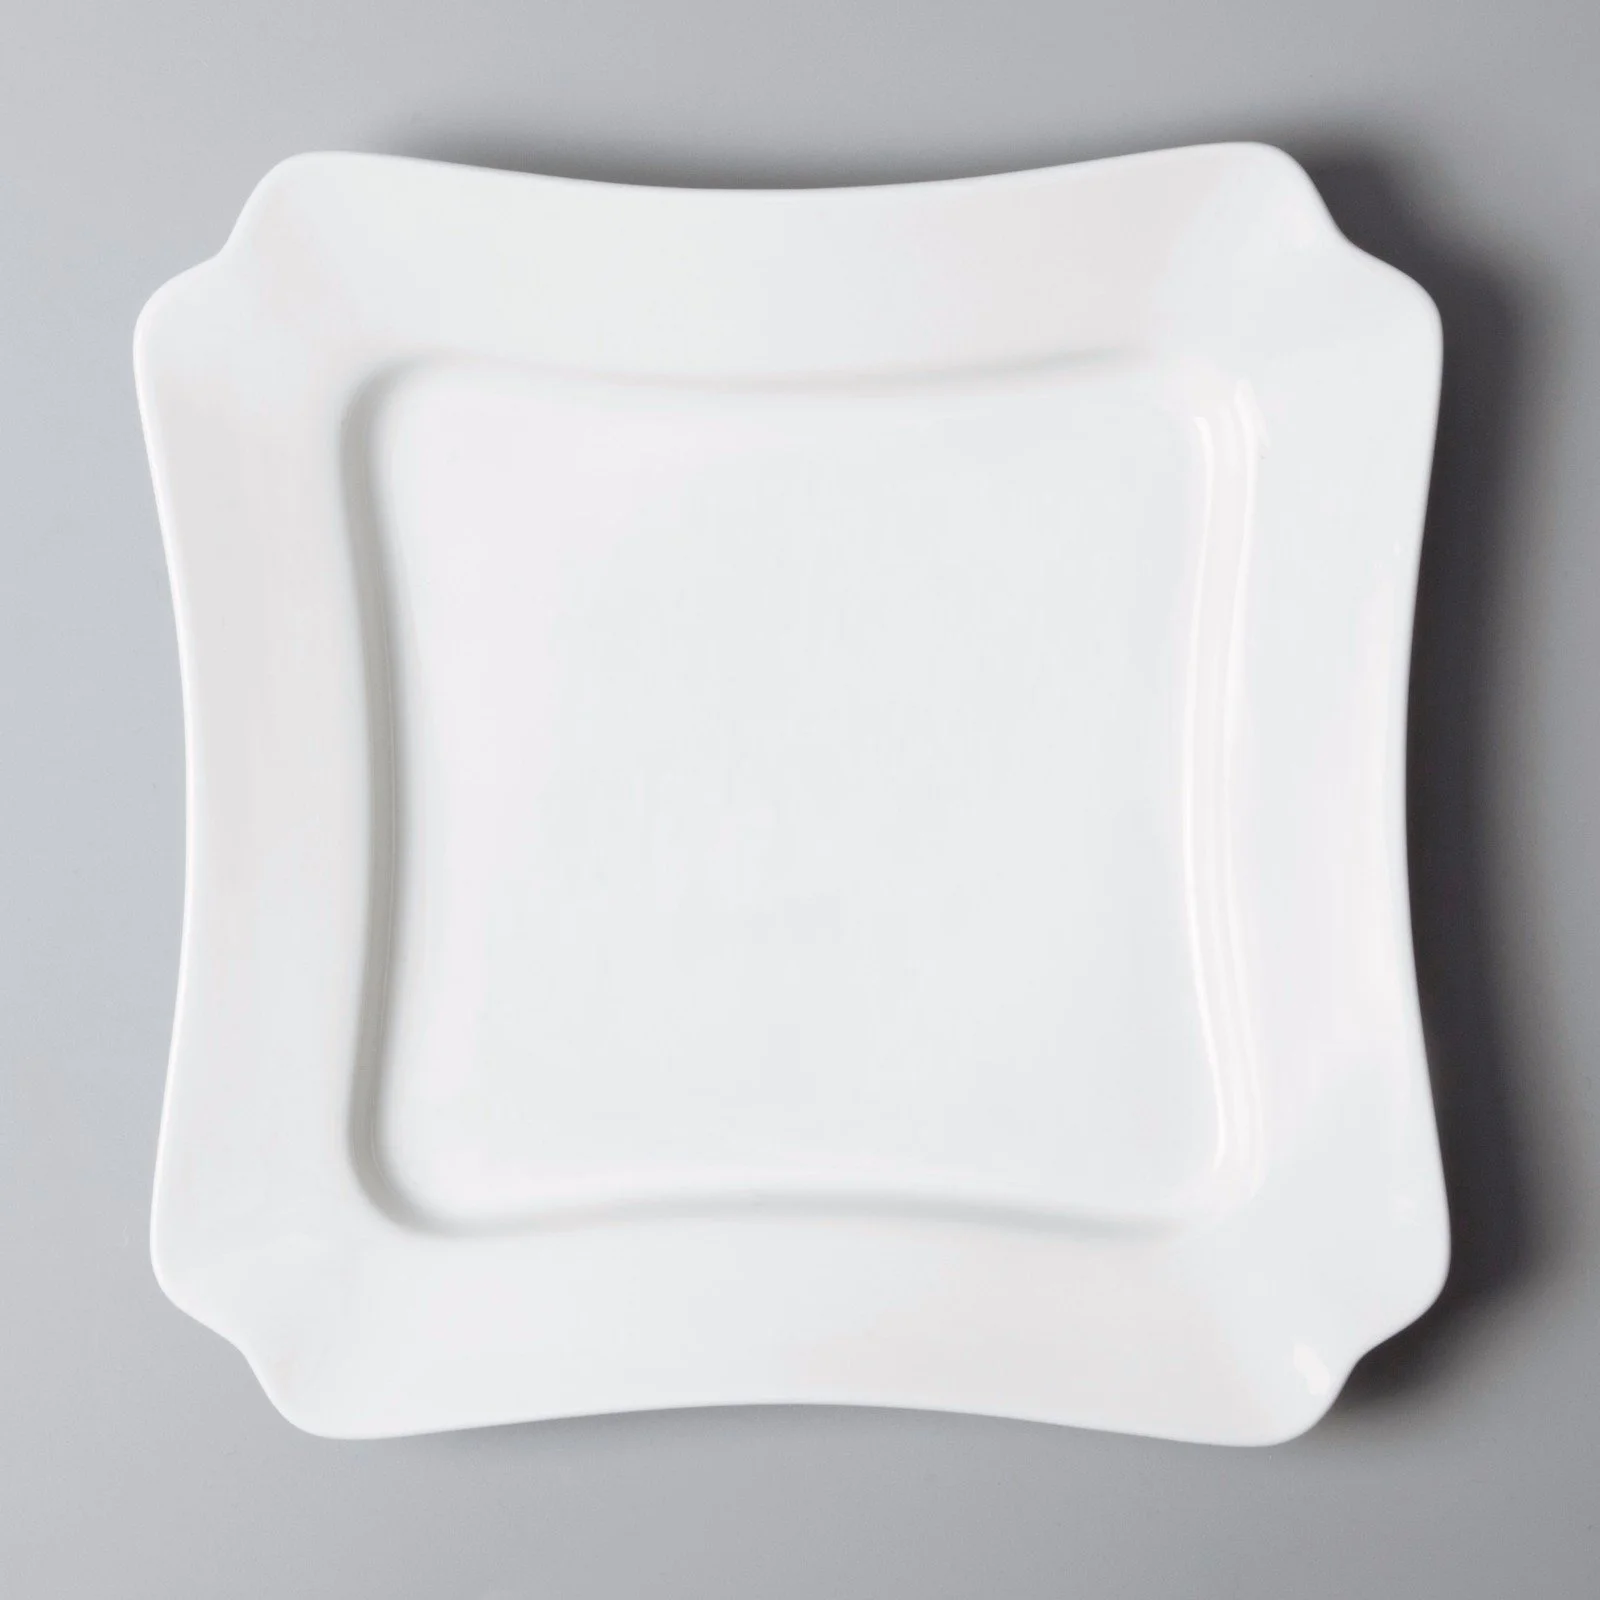 white porcelain tableware hotel bing two eight ceramics huan Two Eight Brand